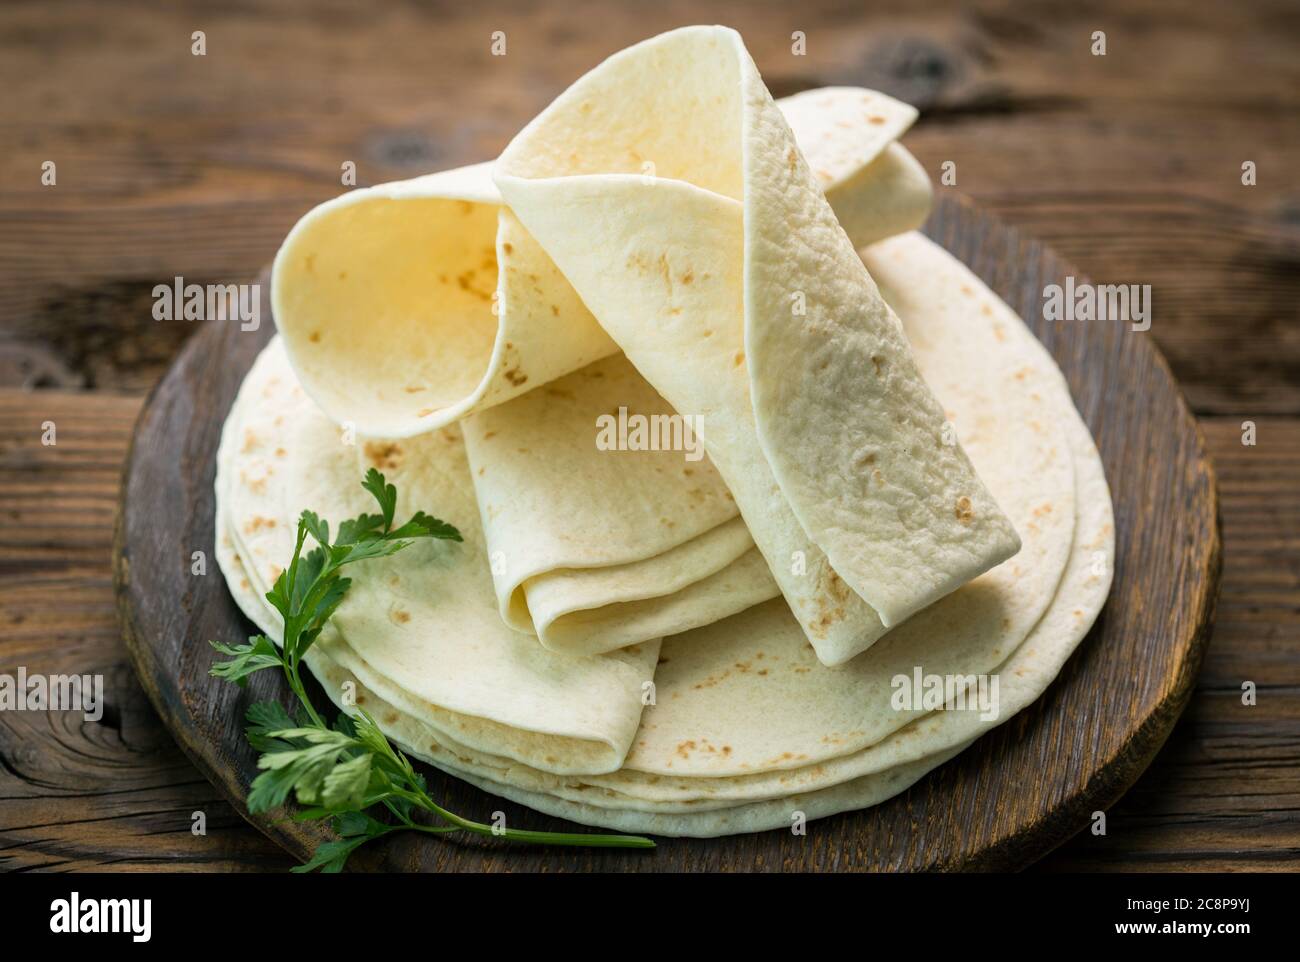 Whole wheat flour tortilla on the wooden table background Stock Photo